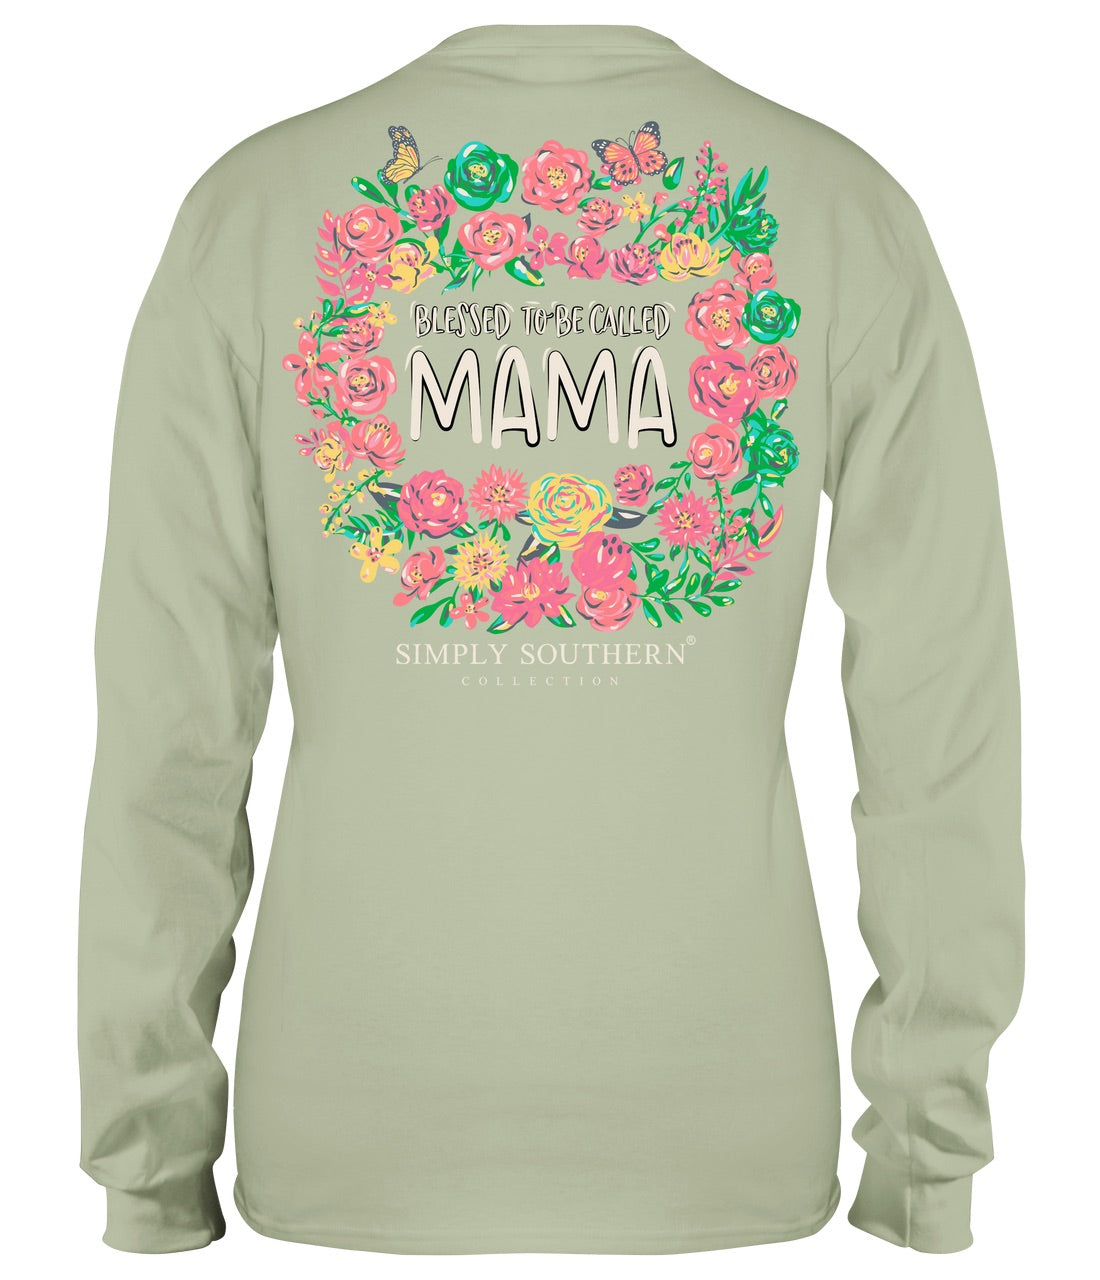 Simply Southern - Blessed to be Called Mama Long Sleeve Tee